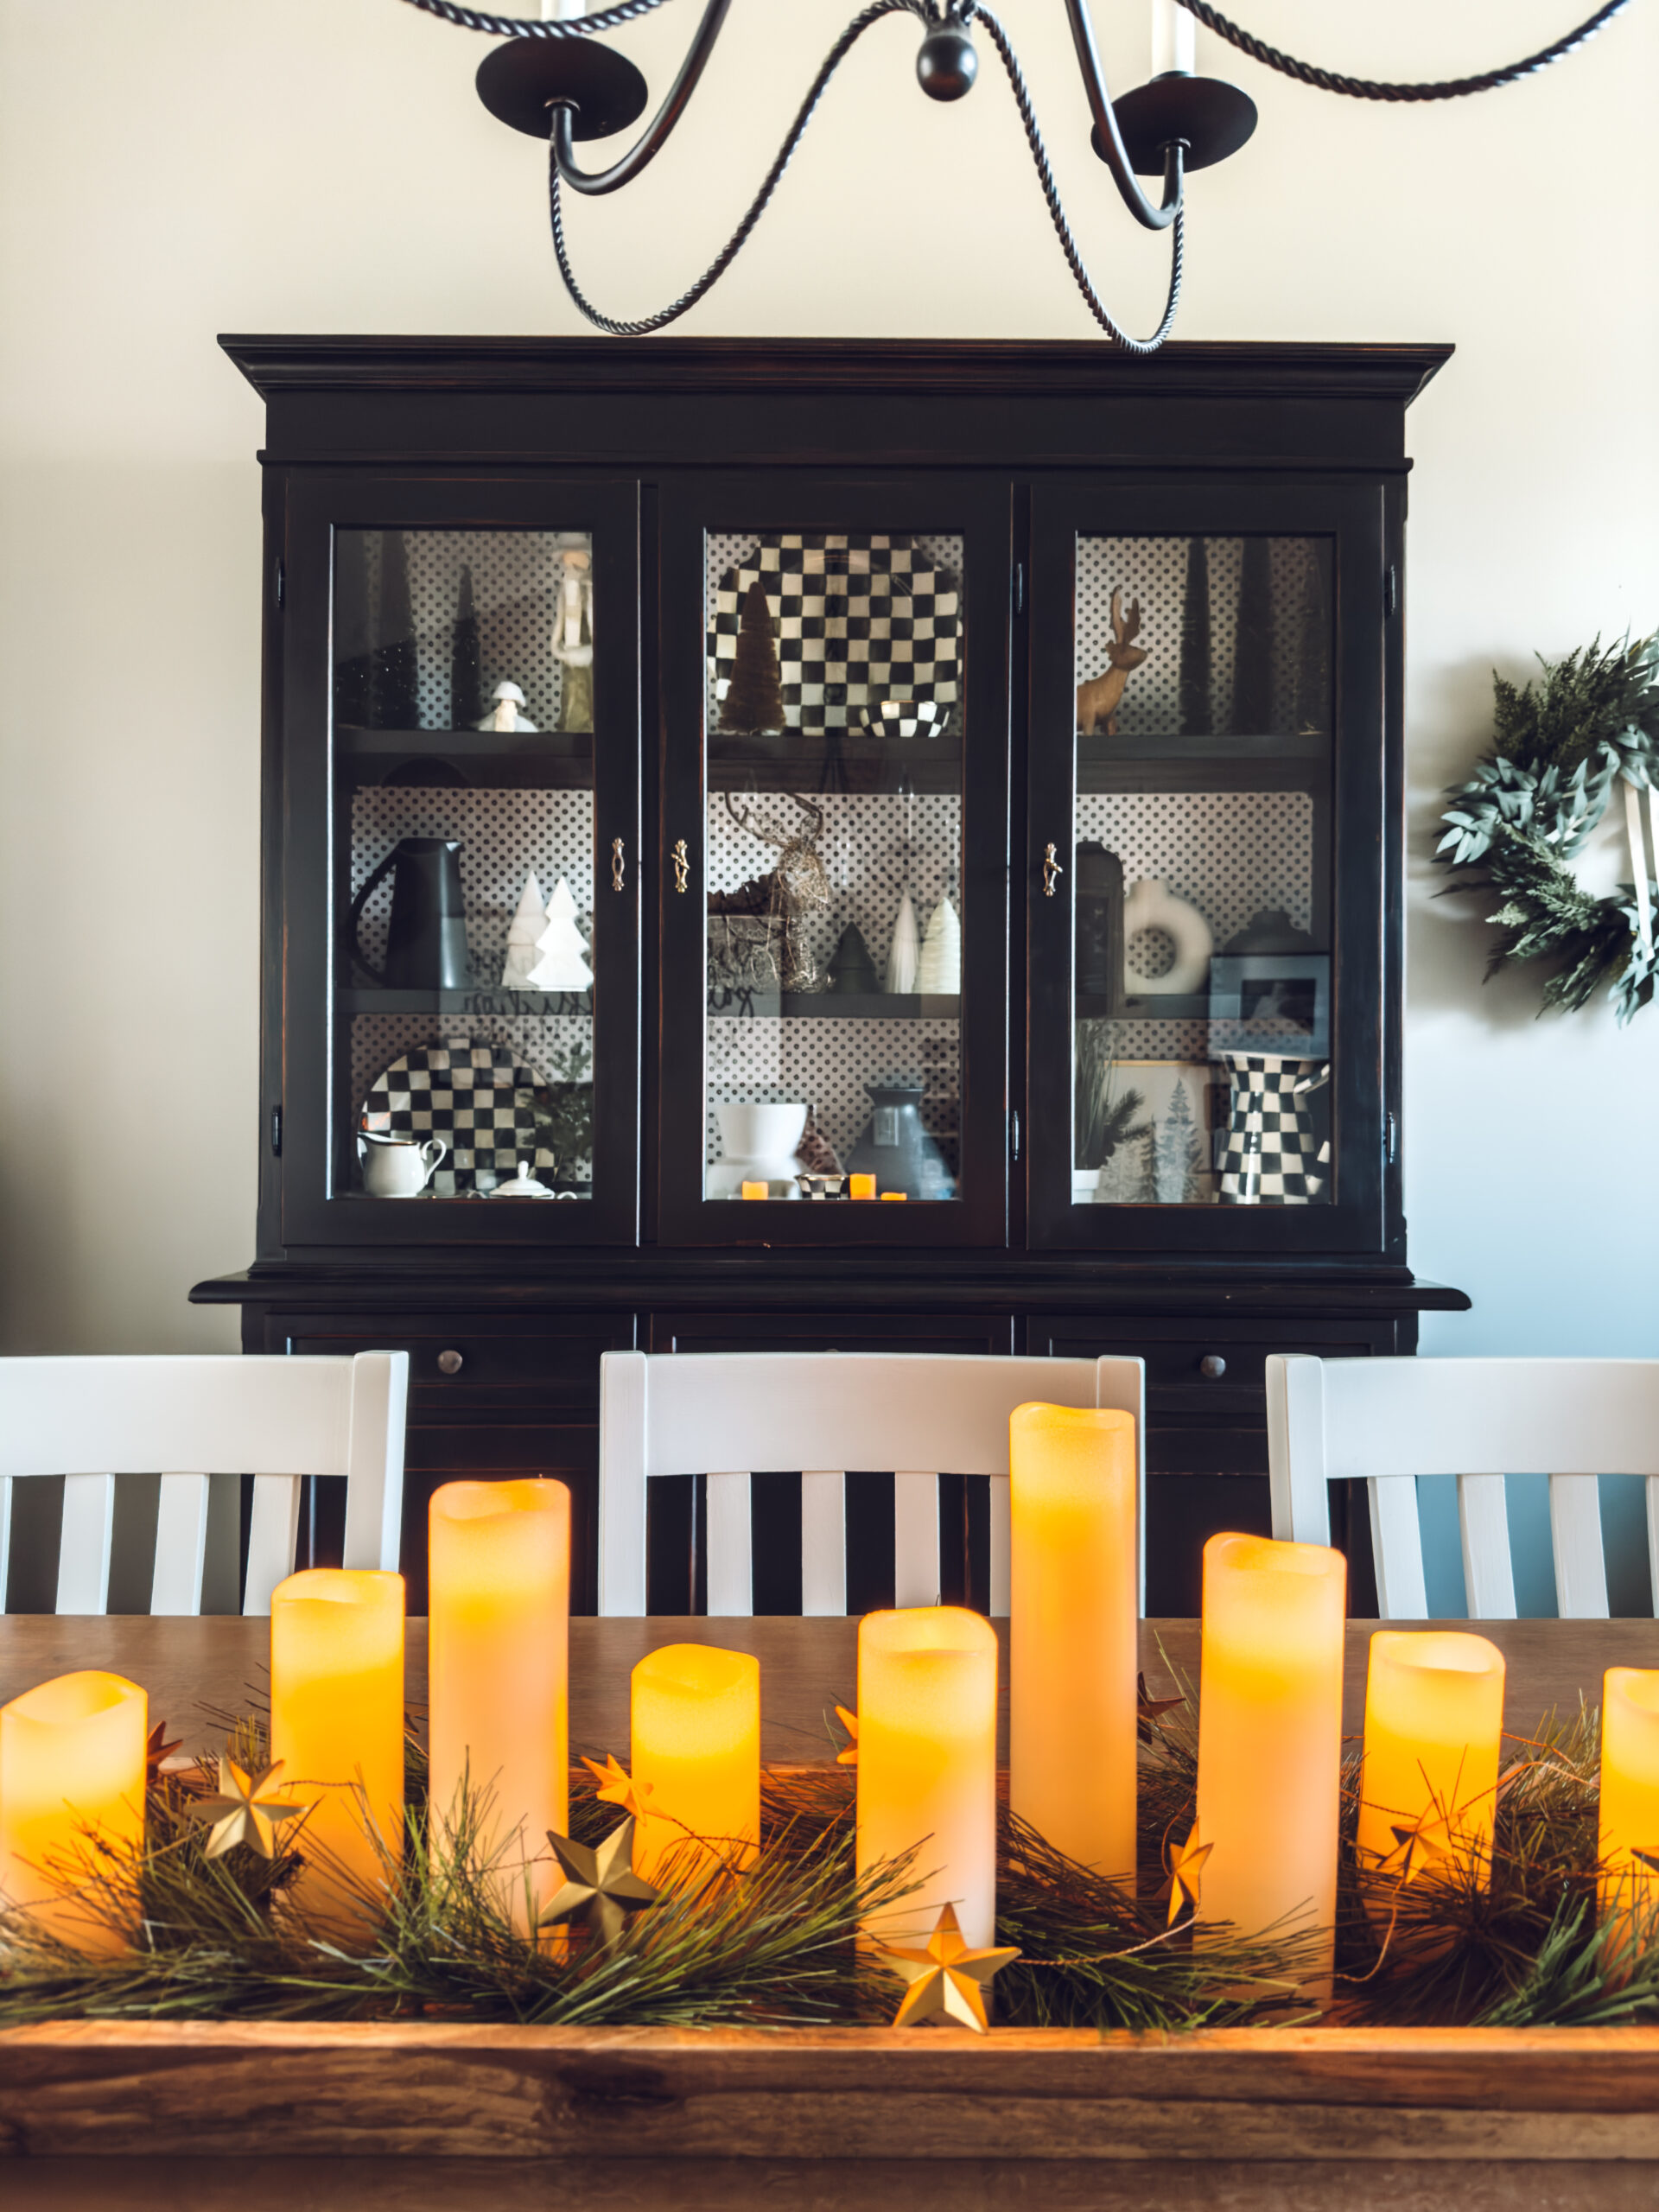 How to style a tray for Christmas? Add flameless candles, greenery and star garland.